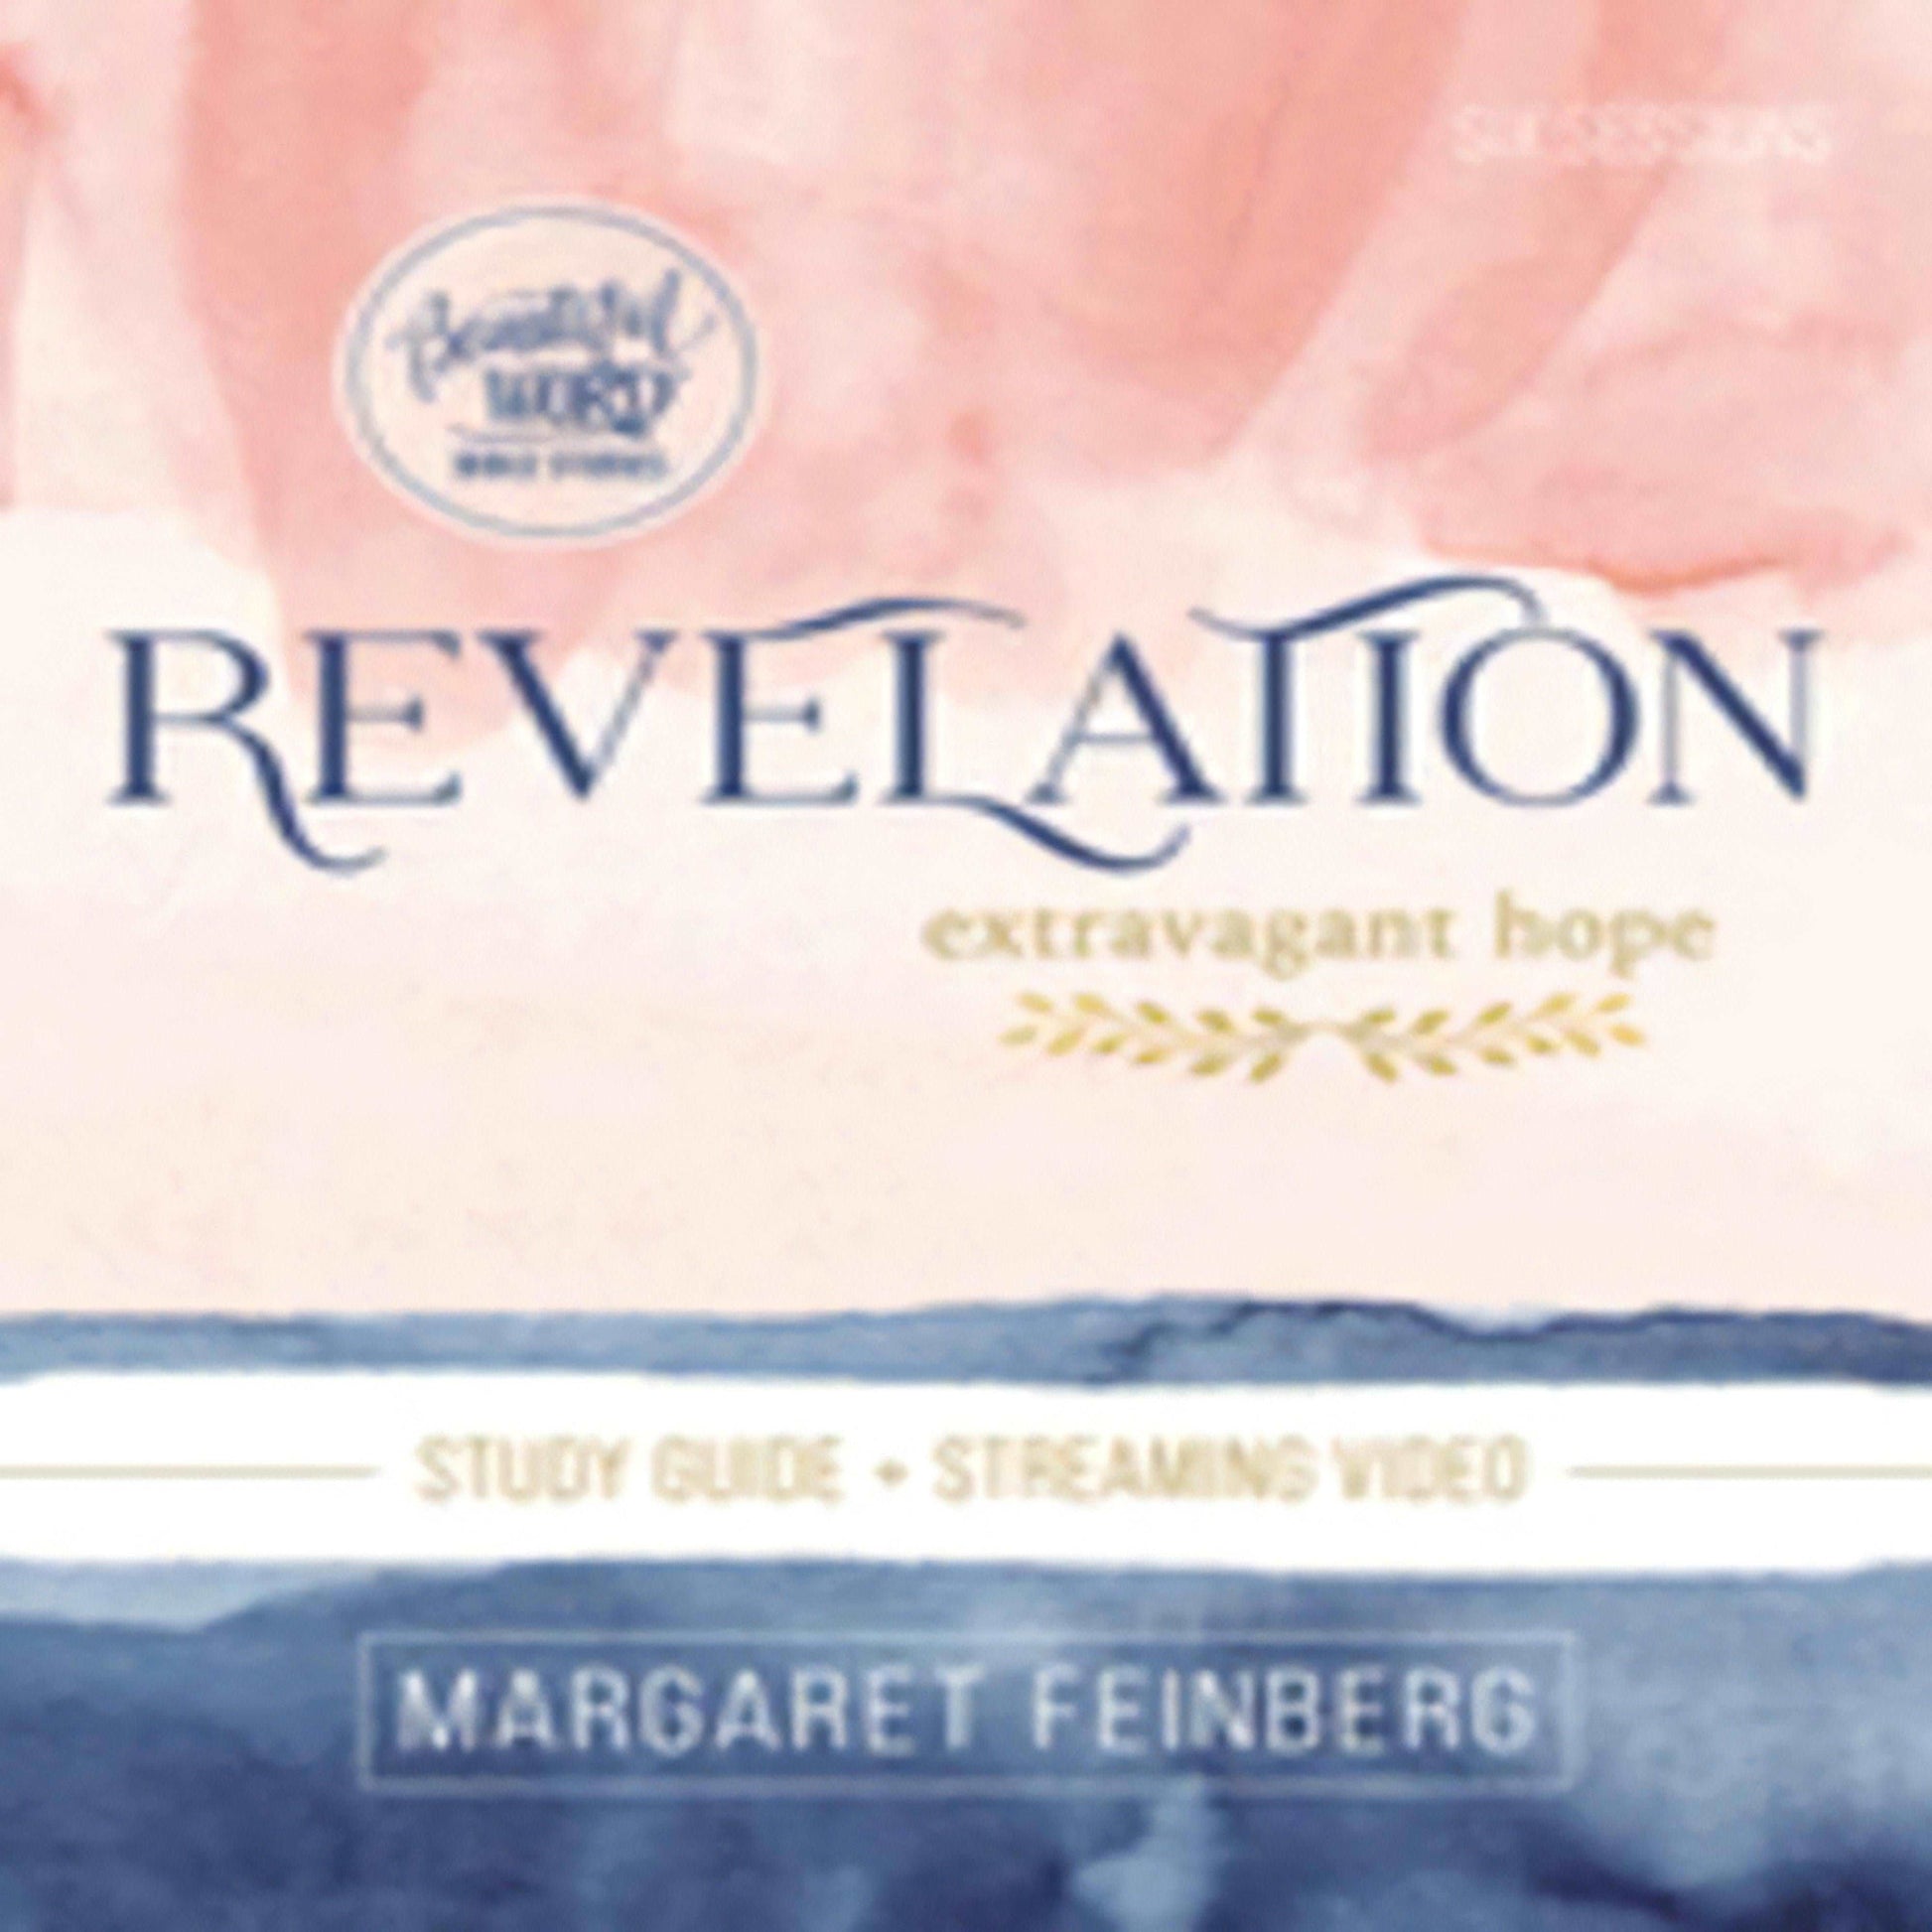 TEXTBOOK Revelation Bible Study Guide Plus Streaming Video: Extravagant Hope (Beautiful Word Bible Studies)263-032023-0310146194DPGBOOKSTORE.COM. Today's Bestsellers.